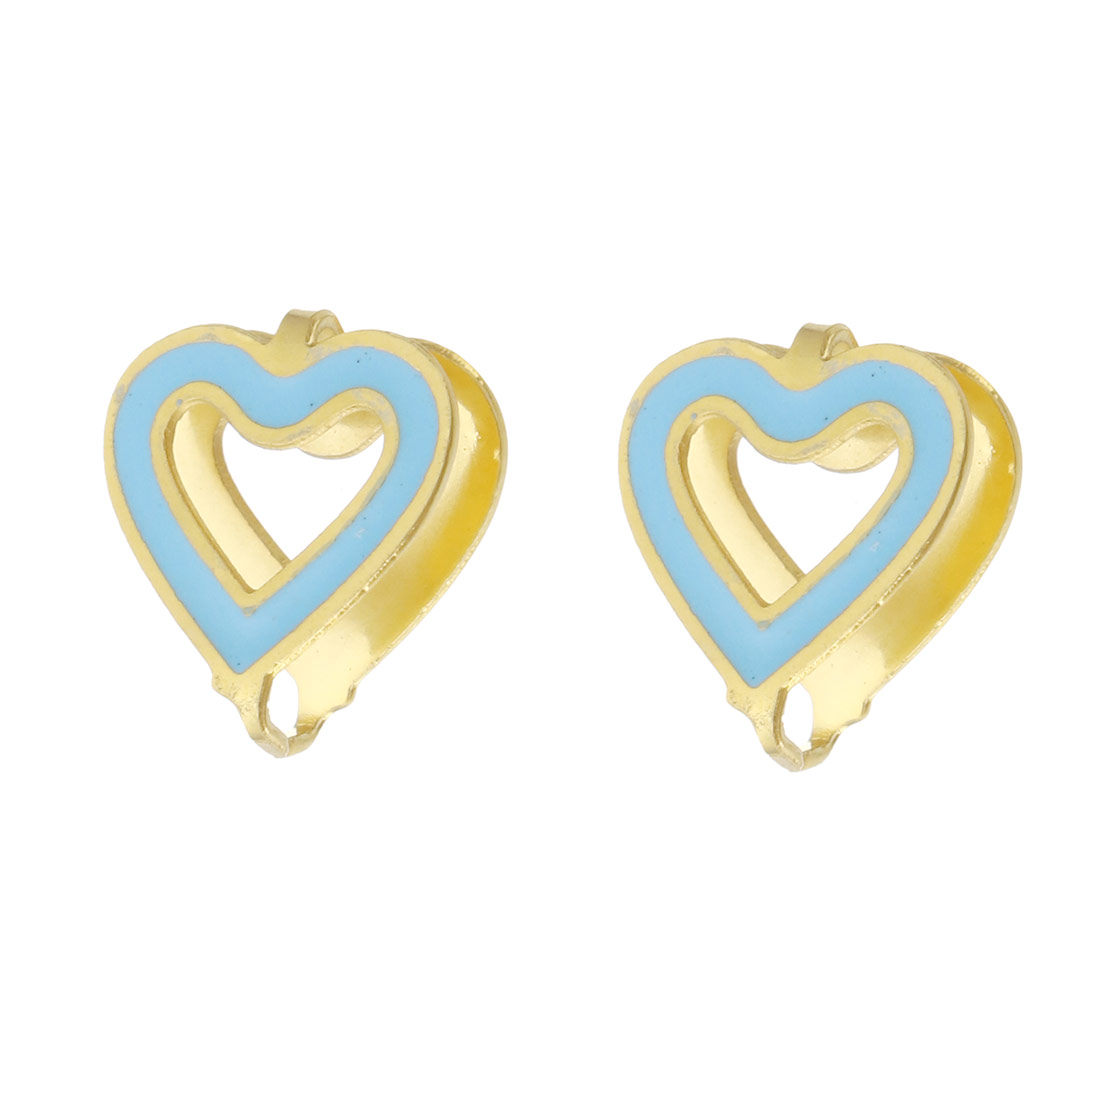 4:gold color plated with skyblue